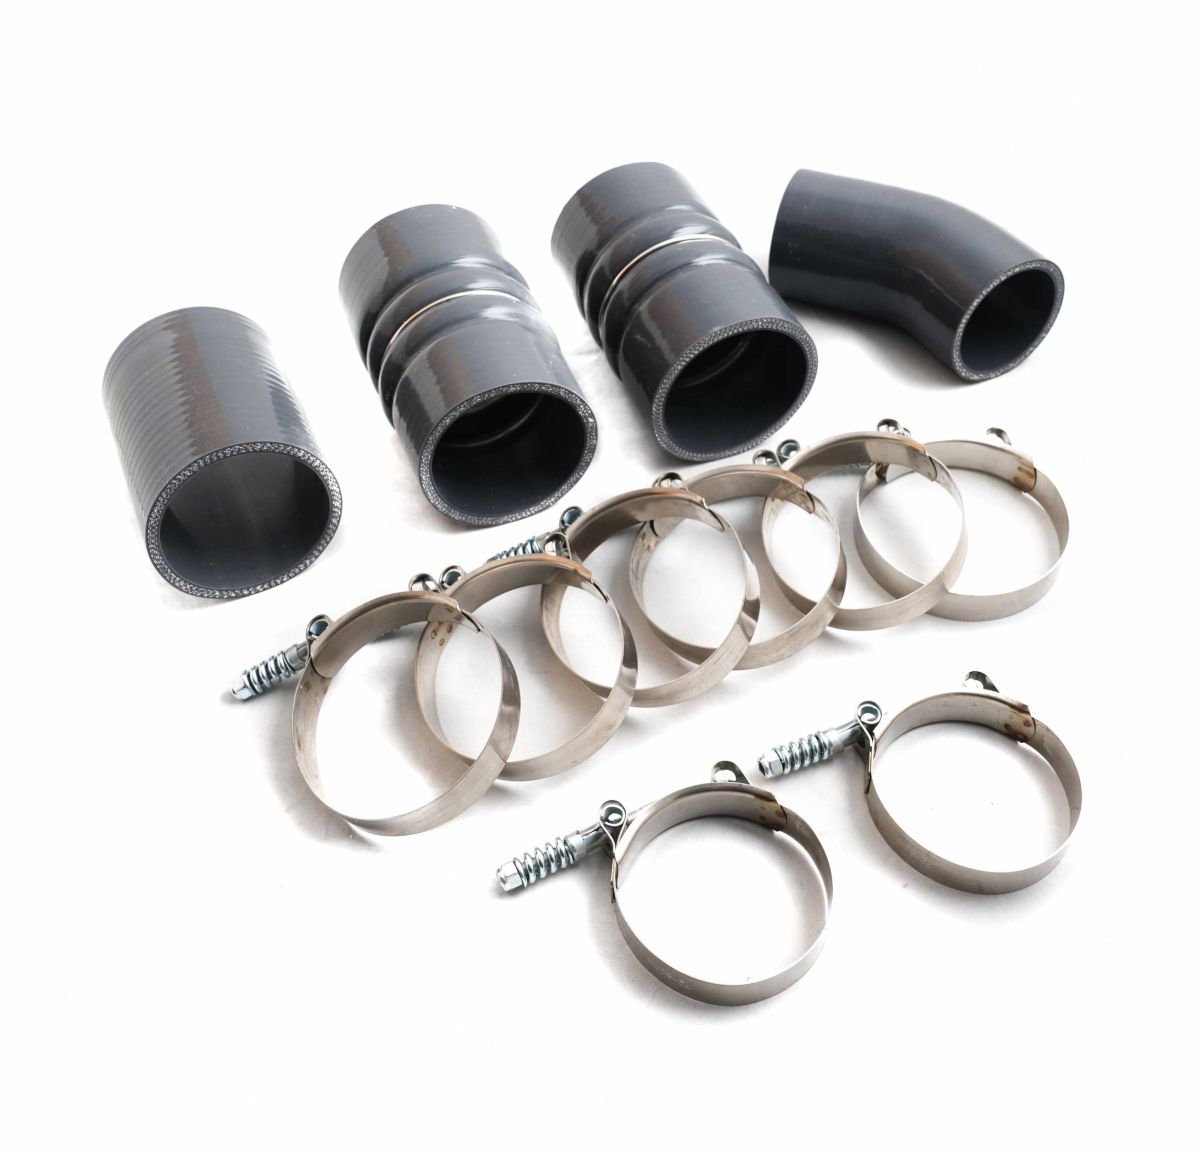 Rudy's Performance Parts - Rudy's Replacement Intercooler Boot/Clamp Kit For 03-07 6.0 Powerstroke